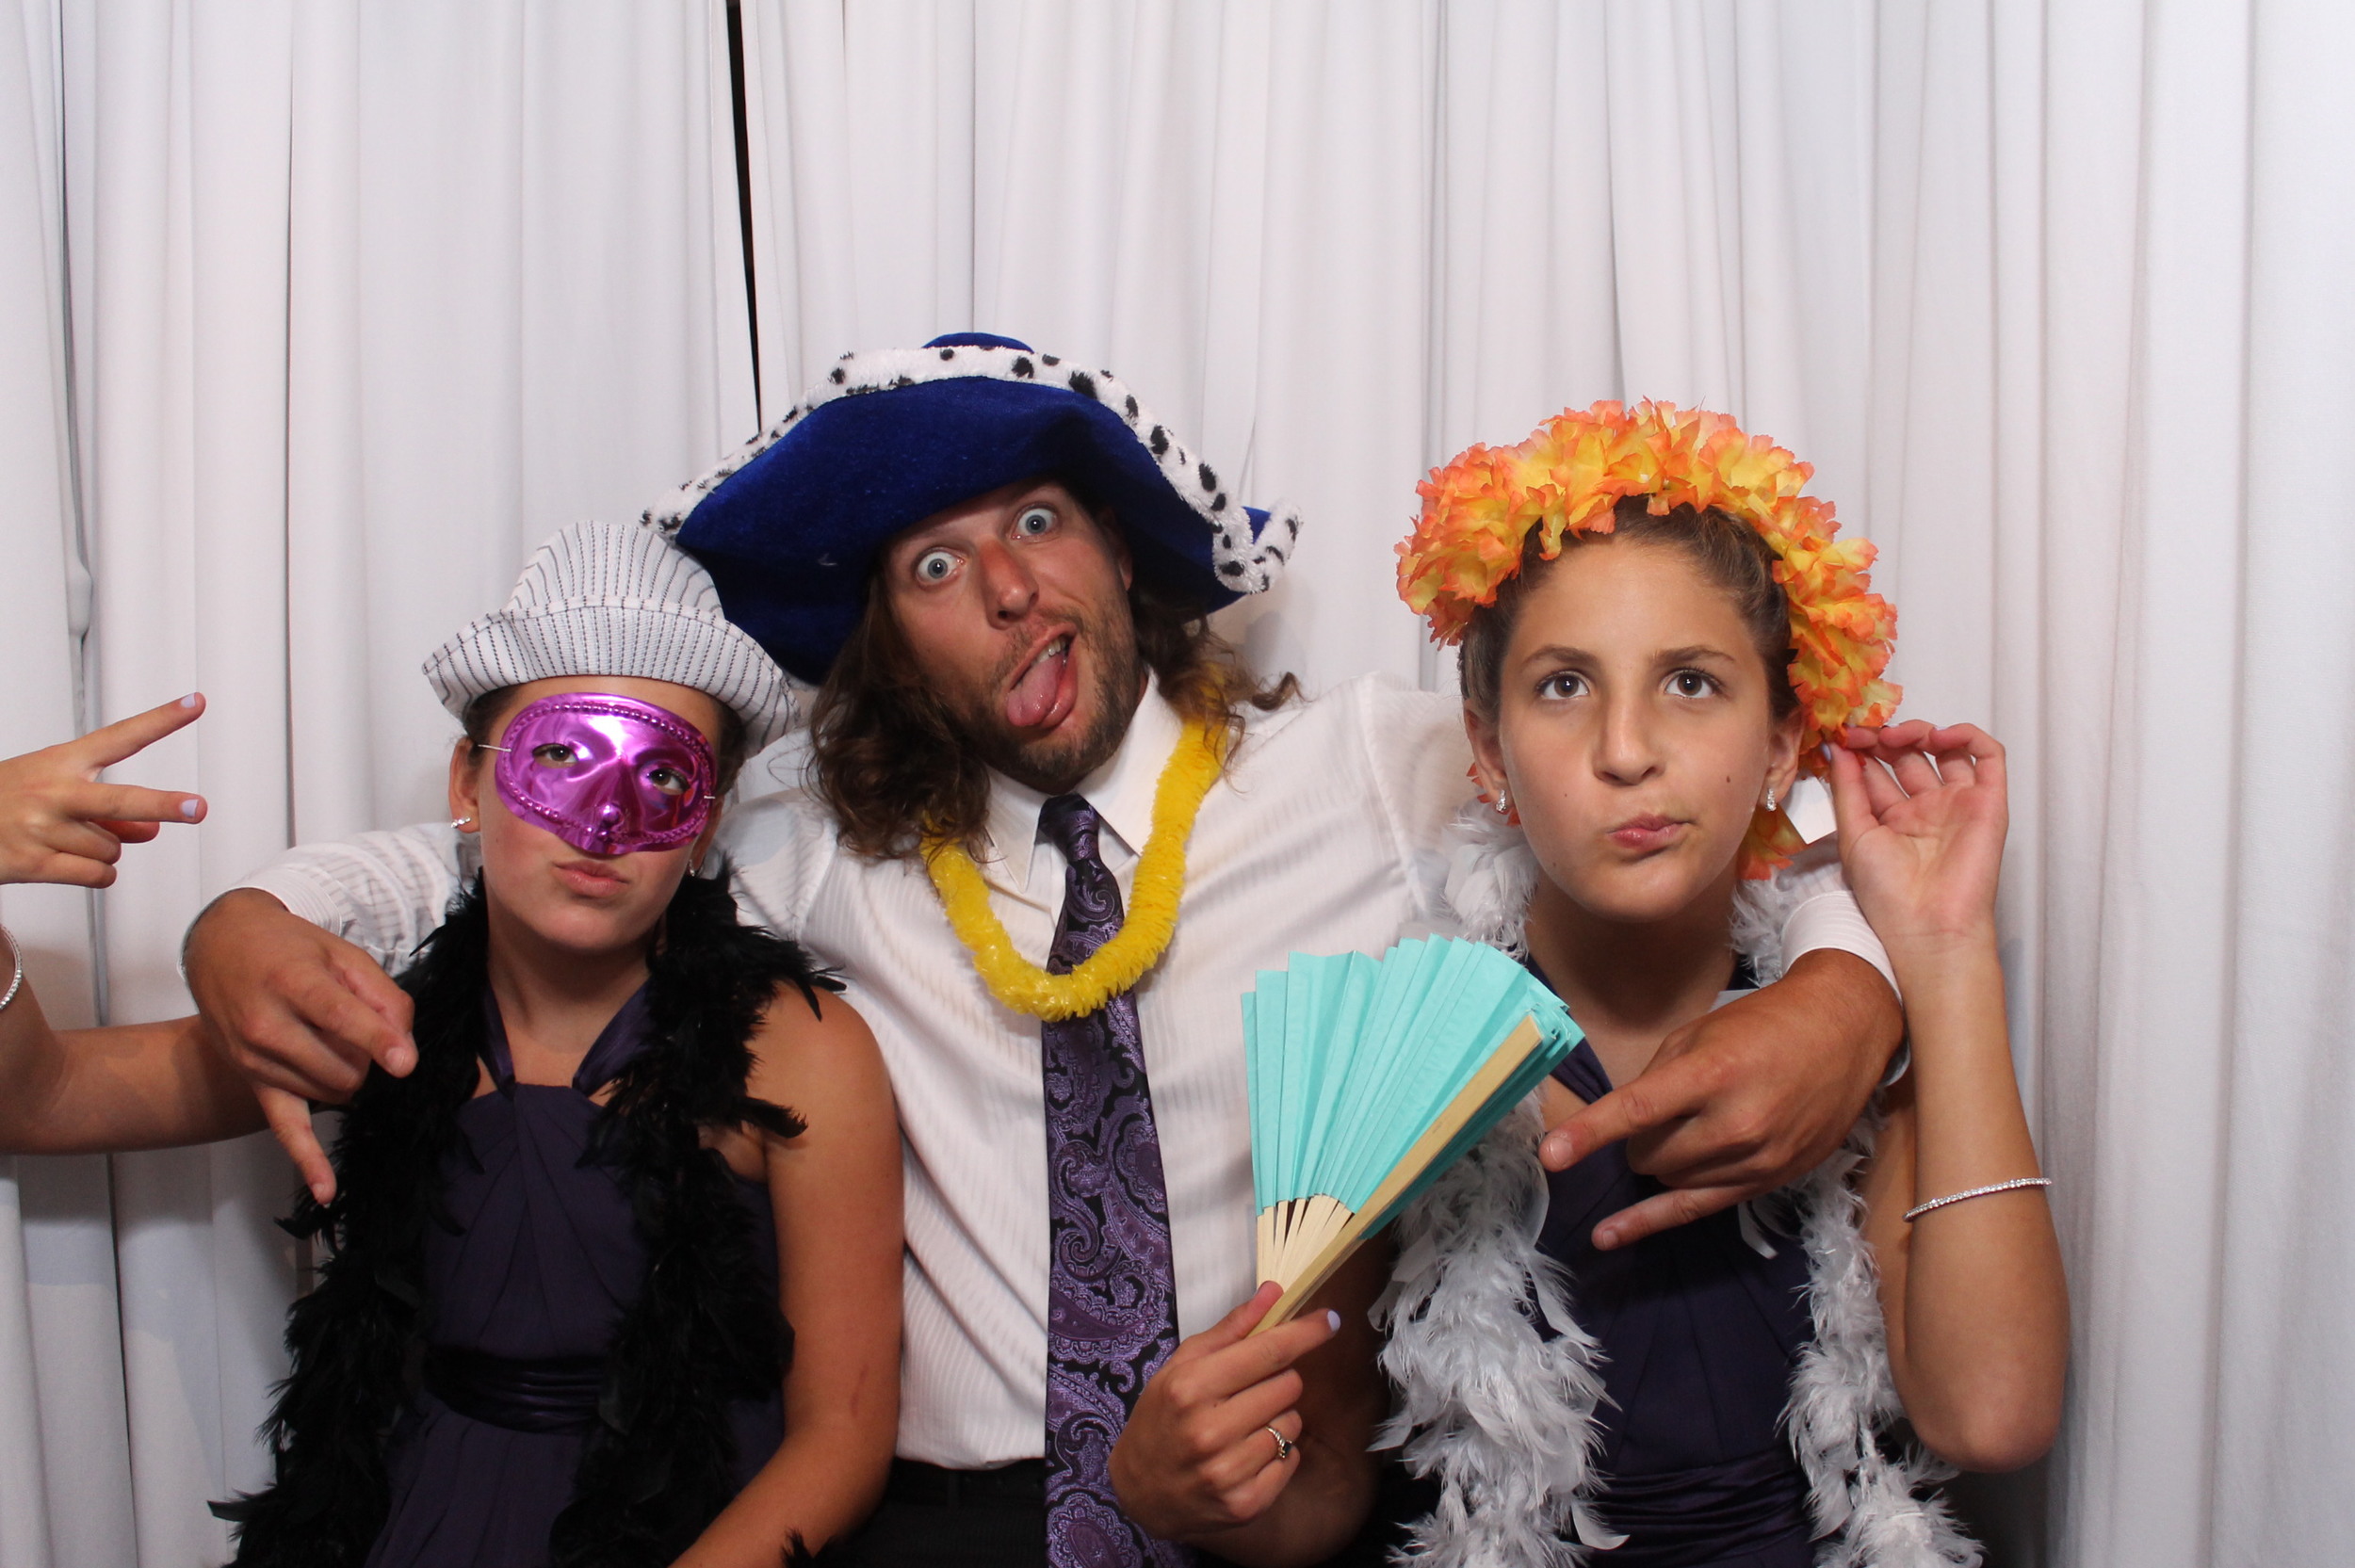 Snapshot Photobooths at the DoubleTree in Tinton Falls, New Jersey